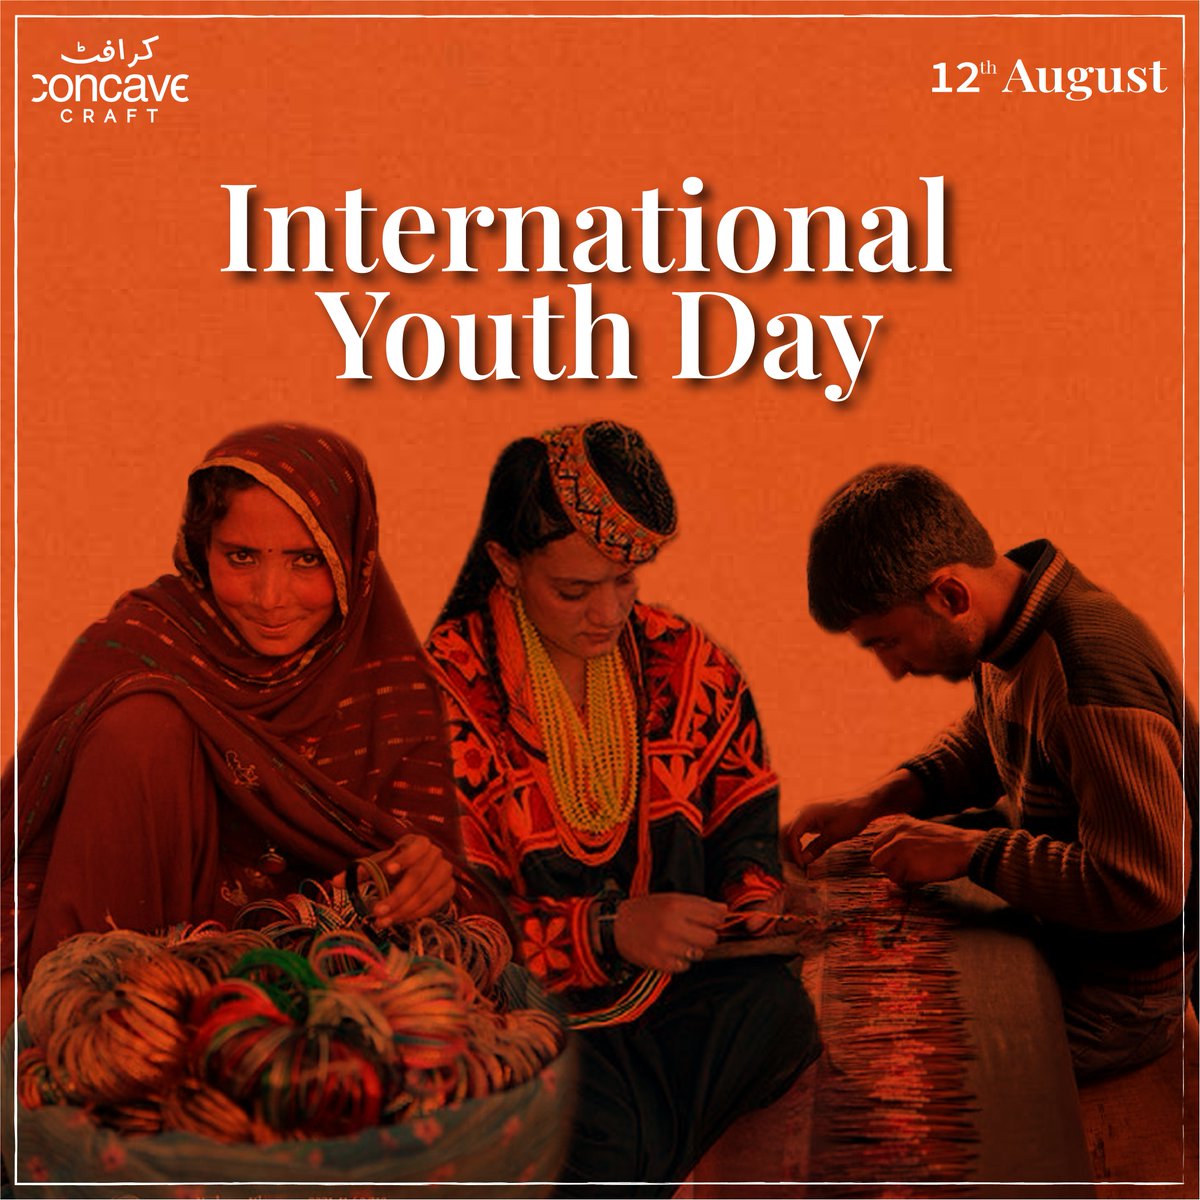 Celebrate International Youth Day,empowering young change makers to create a brighter future. Amplify their voices, passion, and initiatives for a sustainable,inclusive, and equitable world. #ConcaveCraft #azaadisale2023 #azaadisale#GlobalChangeMakers #InternationalYouthDay